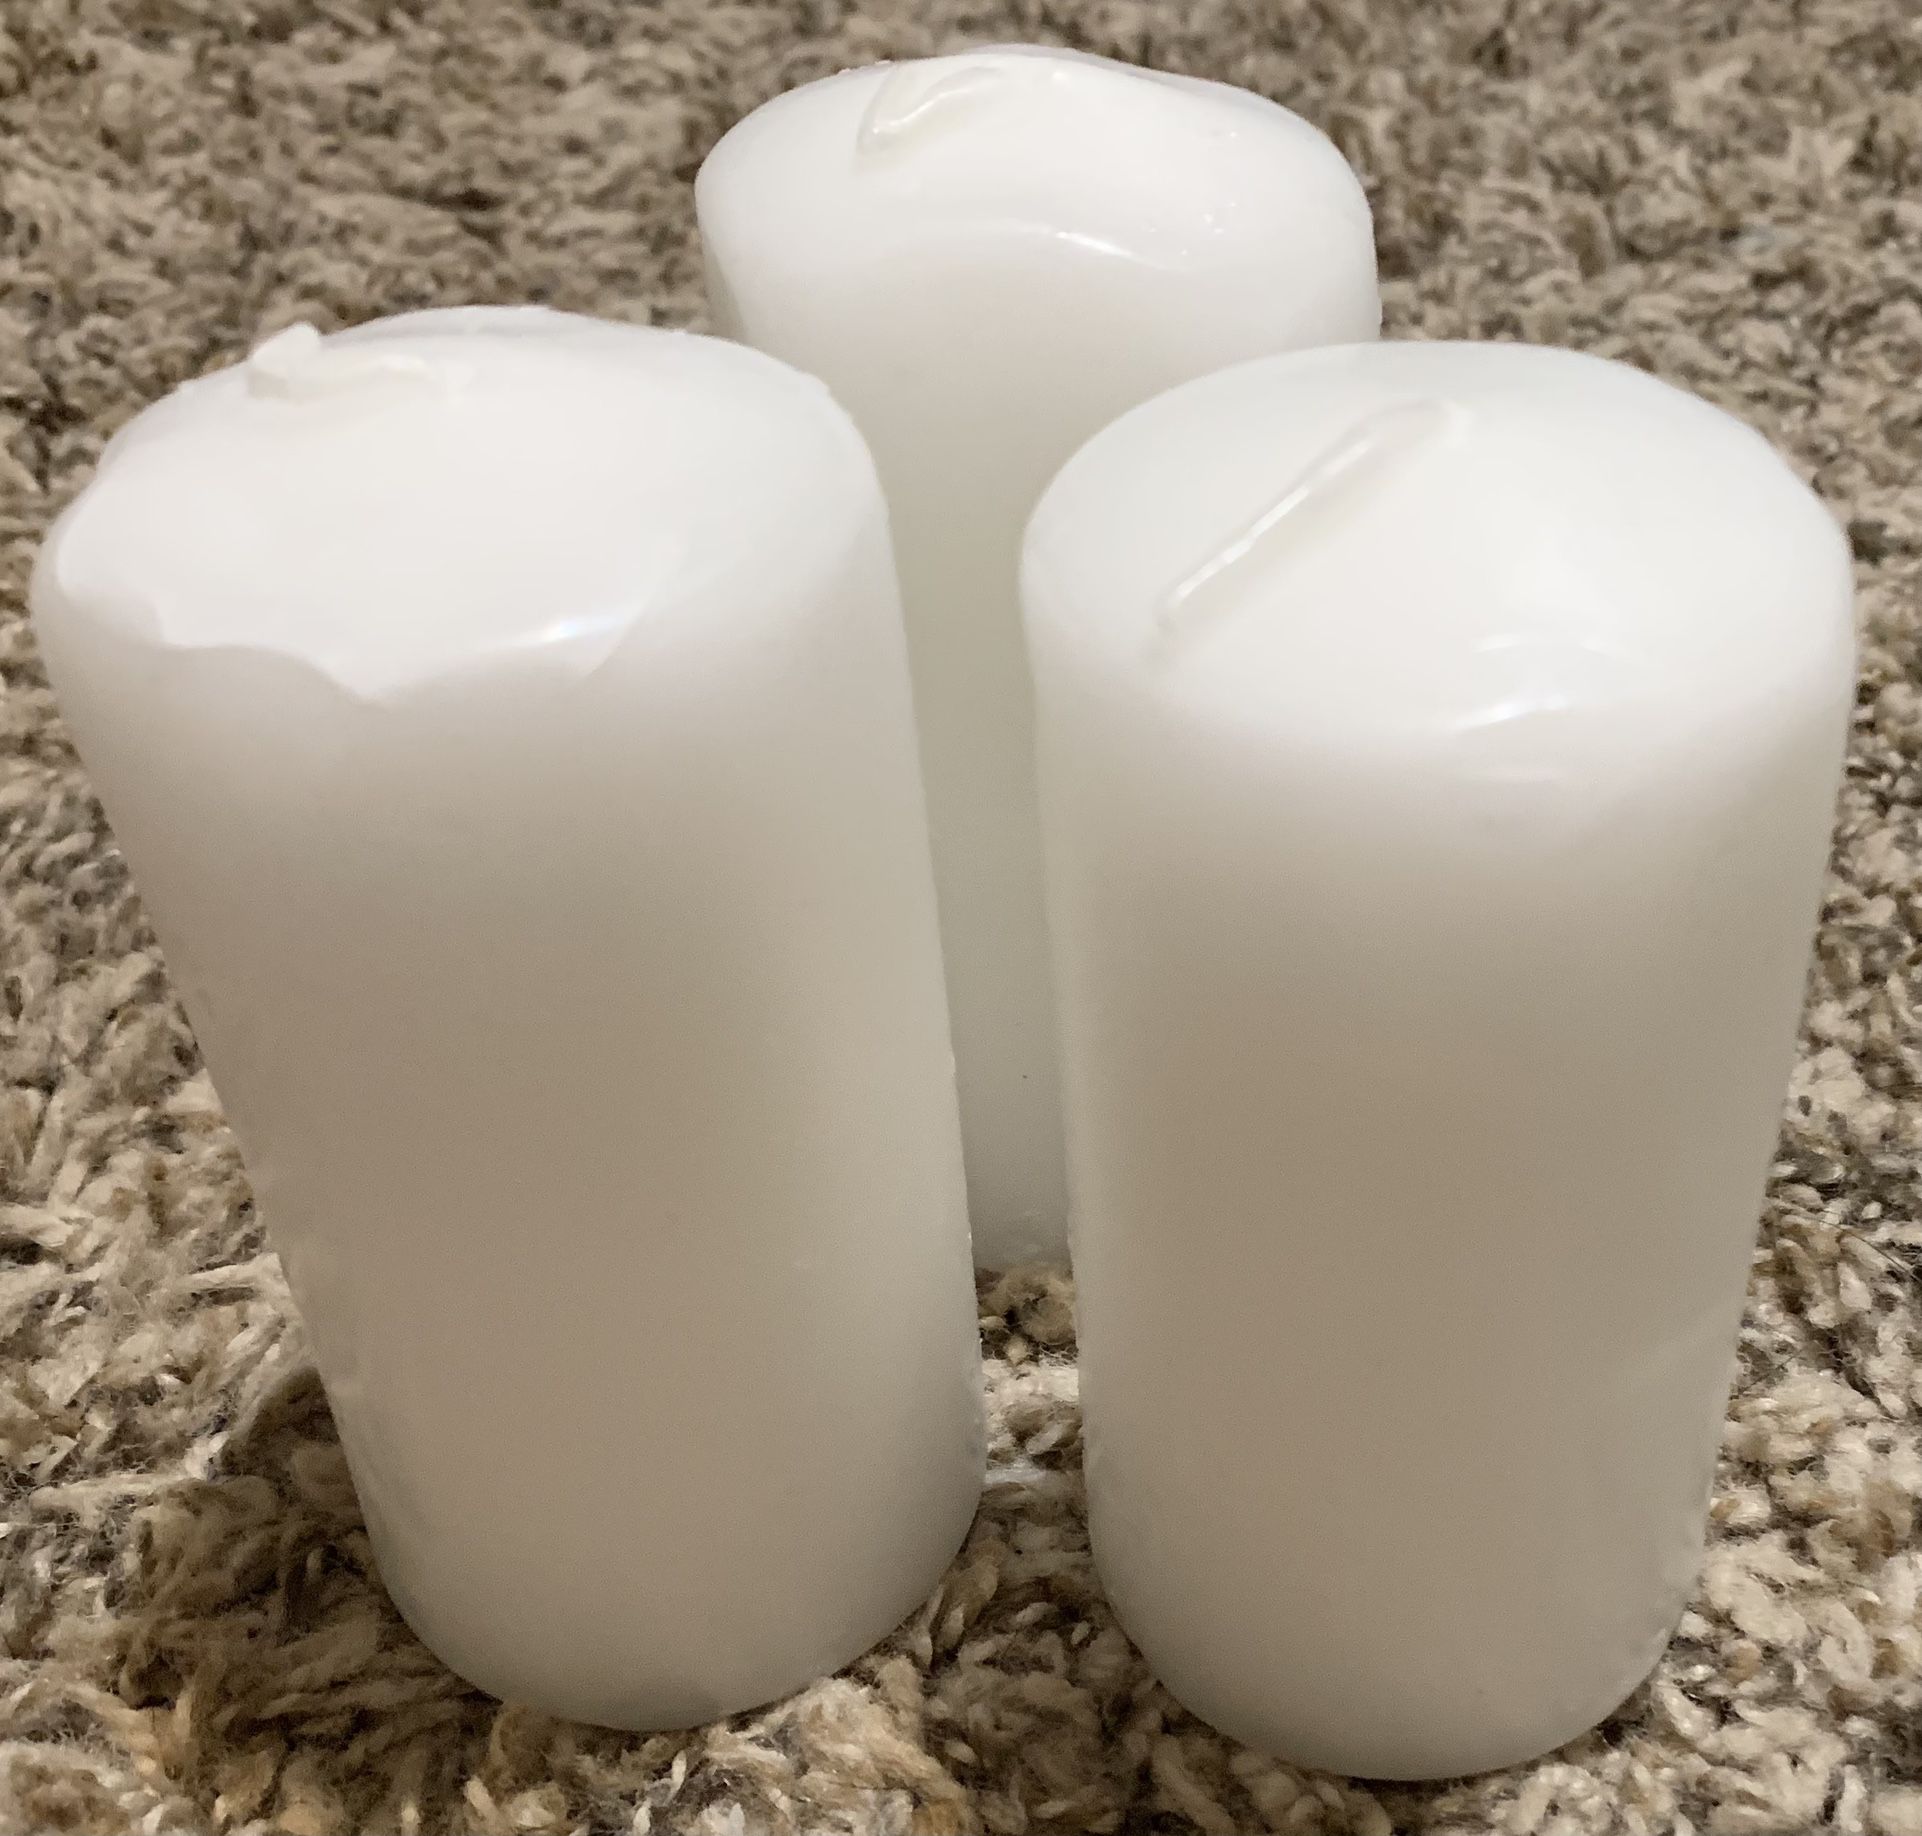 Hyoola Unscented Pillar Candles White 3-Pack 2x3 Inch, European Made